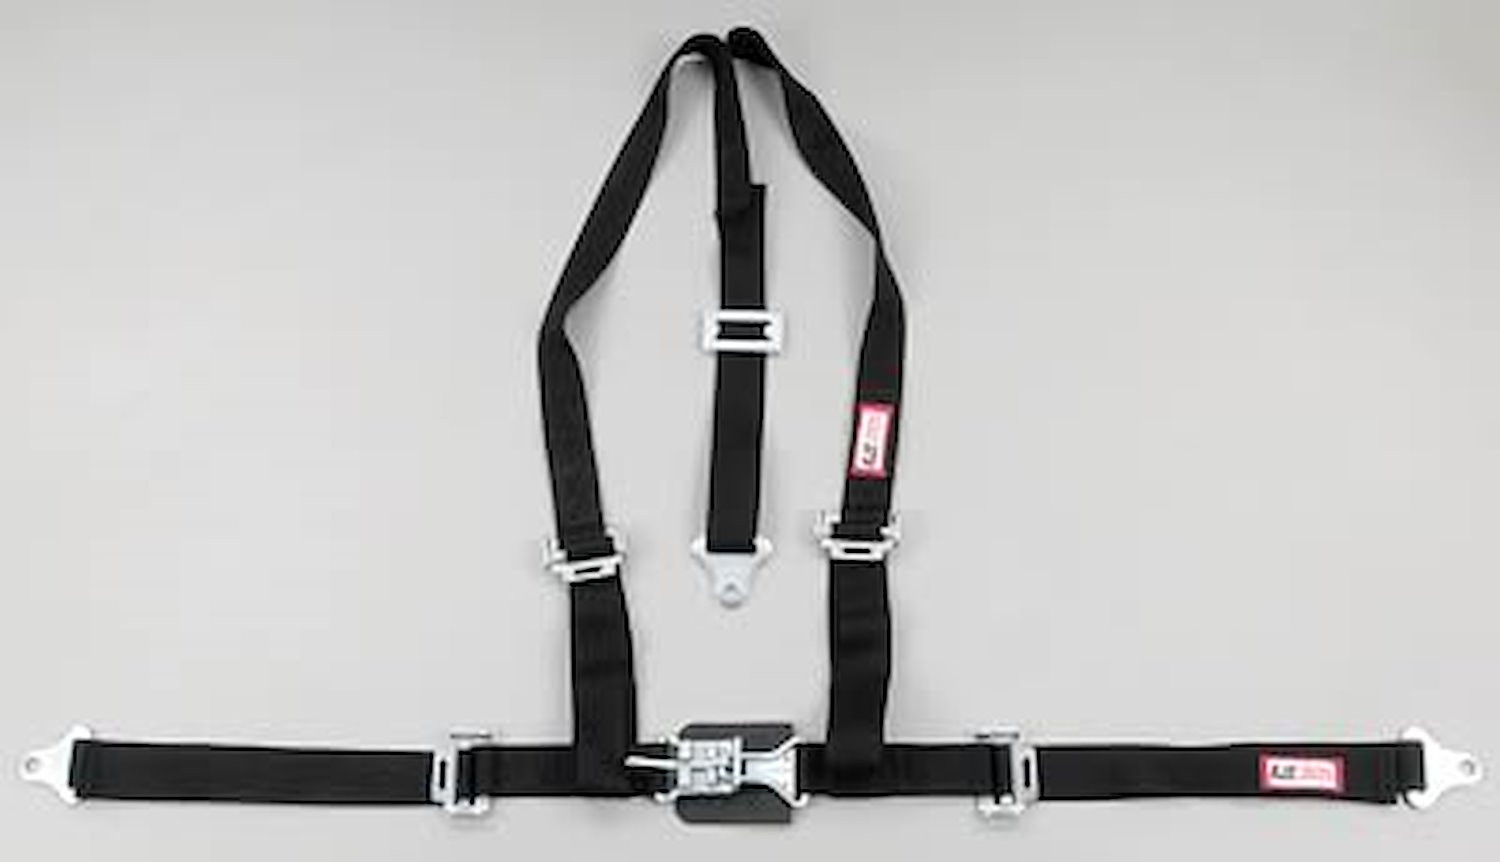 NON-SFI L&L HARNESS 3 PULL DOWN Lap BELT SEWN IN 2 S.H. Y FLOOR Mount ALL WRAP ENDS GRAY